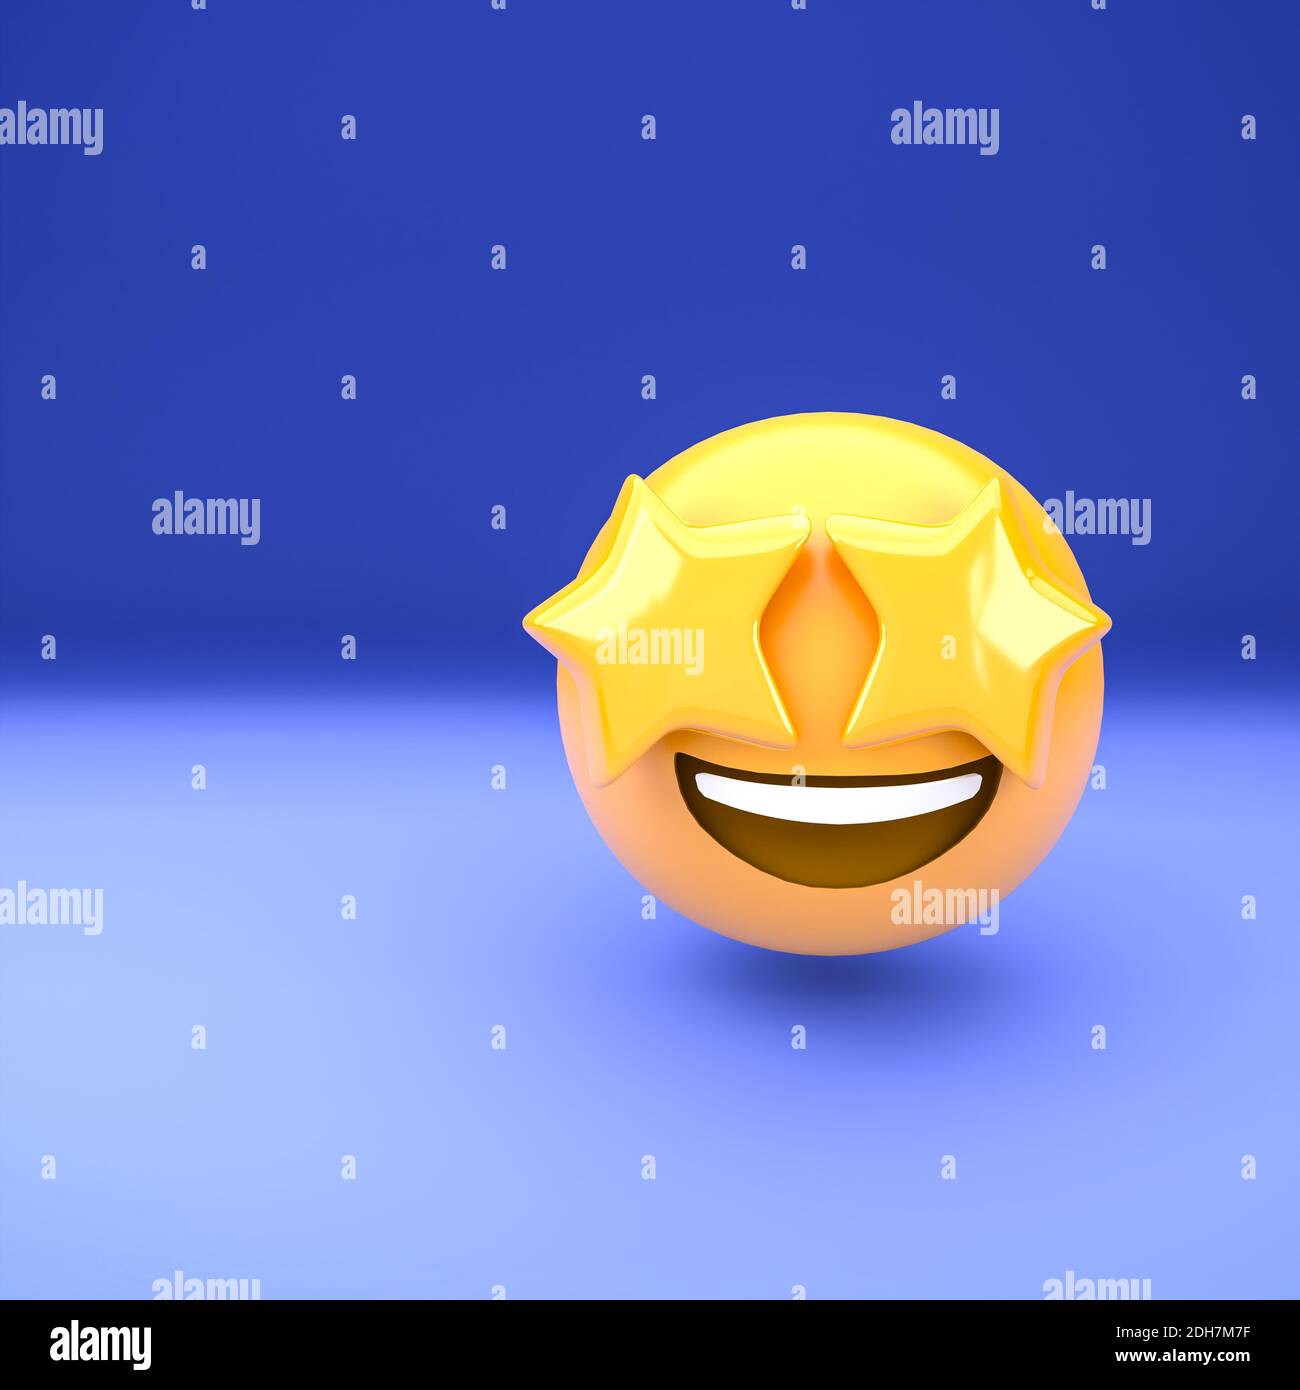 3d emoji face with stars as eyes on a blue background. Star-struck. Stock Photo